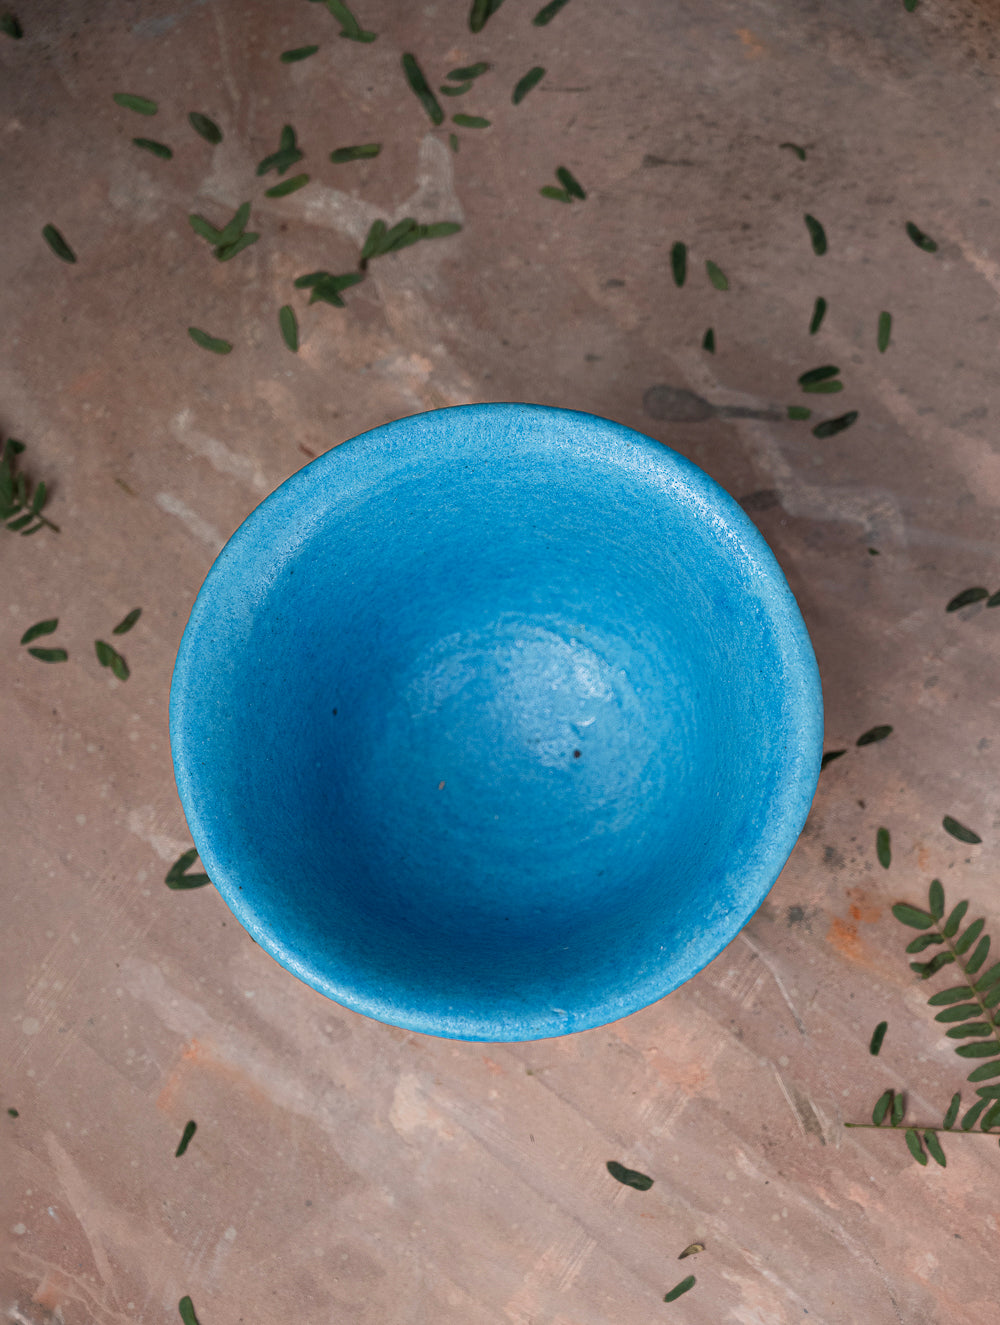 Load image into Gallery viewer, Delhi Blue Art Pottery Curio / Round Utility Bowl